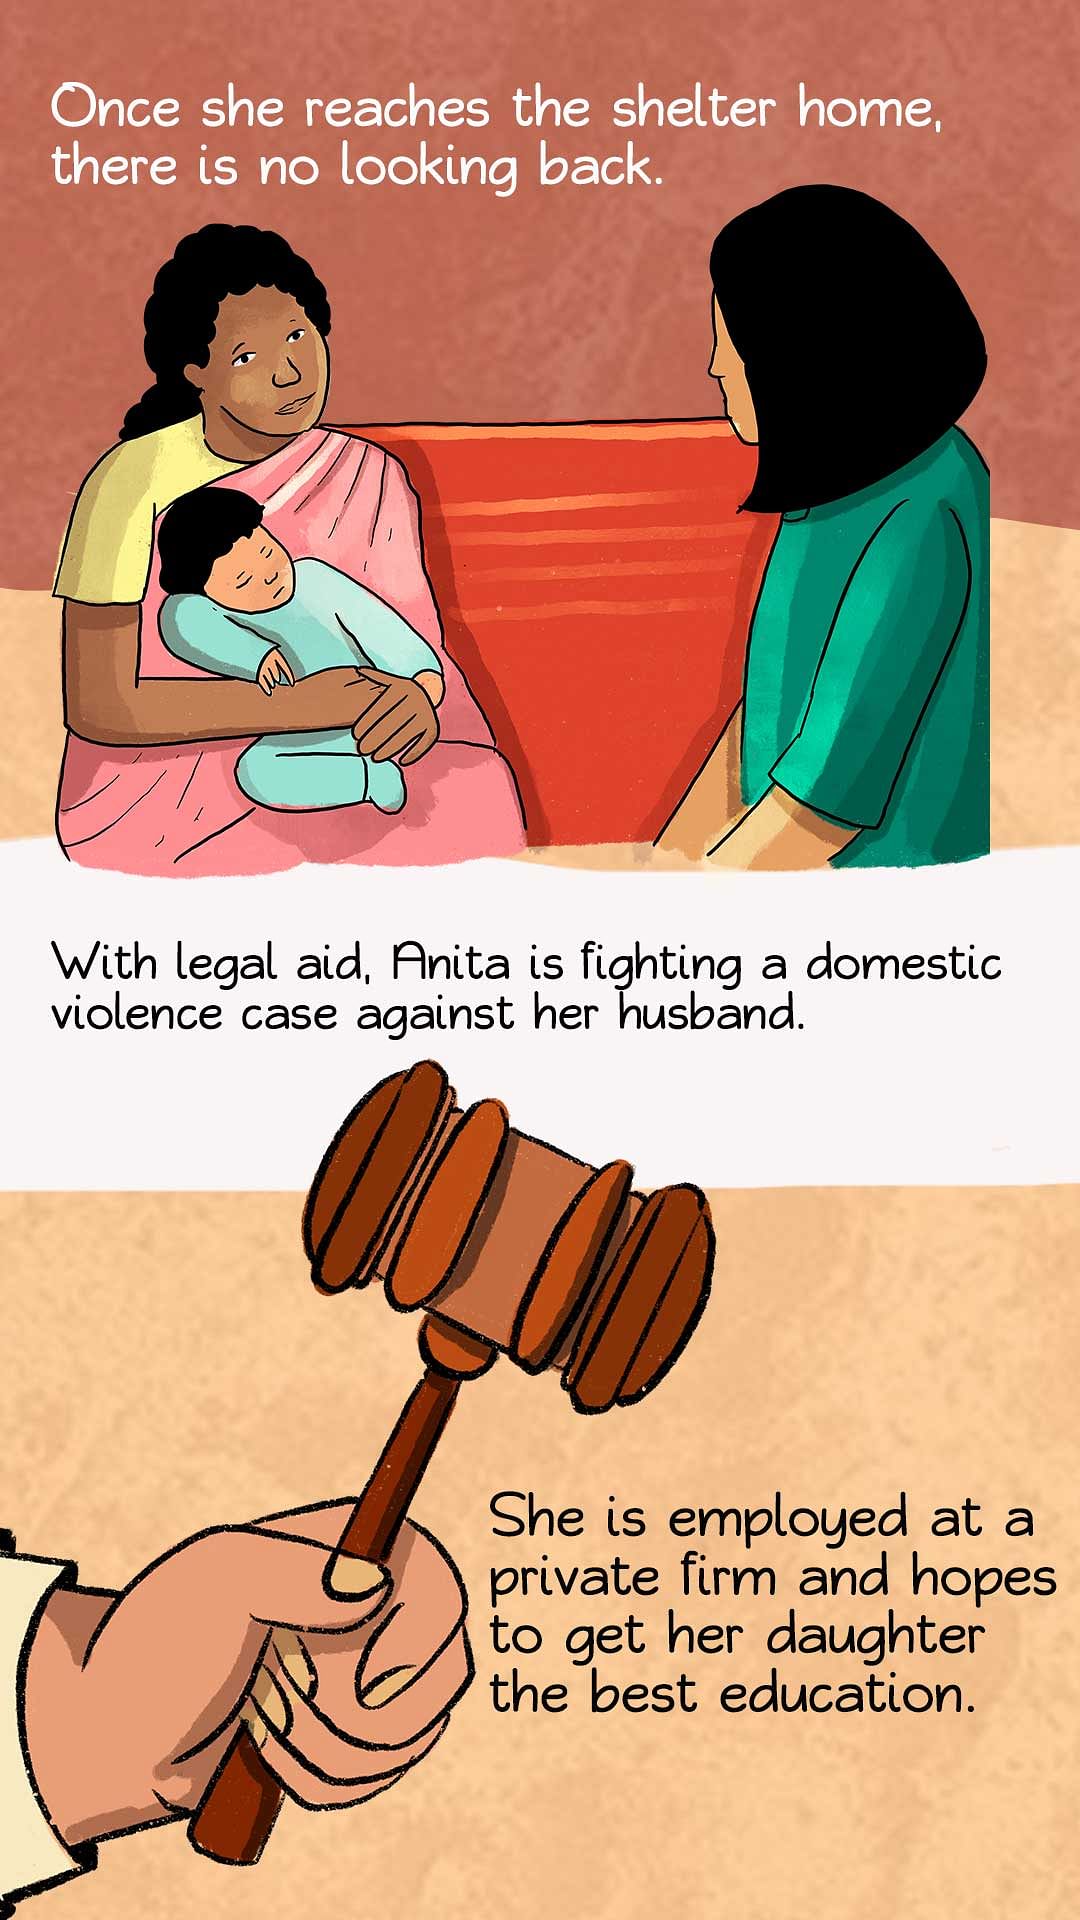 Beyond the laws are stories of women – who have been fighting, marital rape for years. This is one such story.